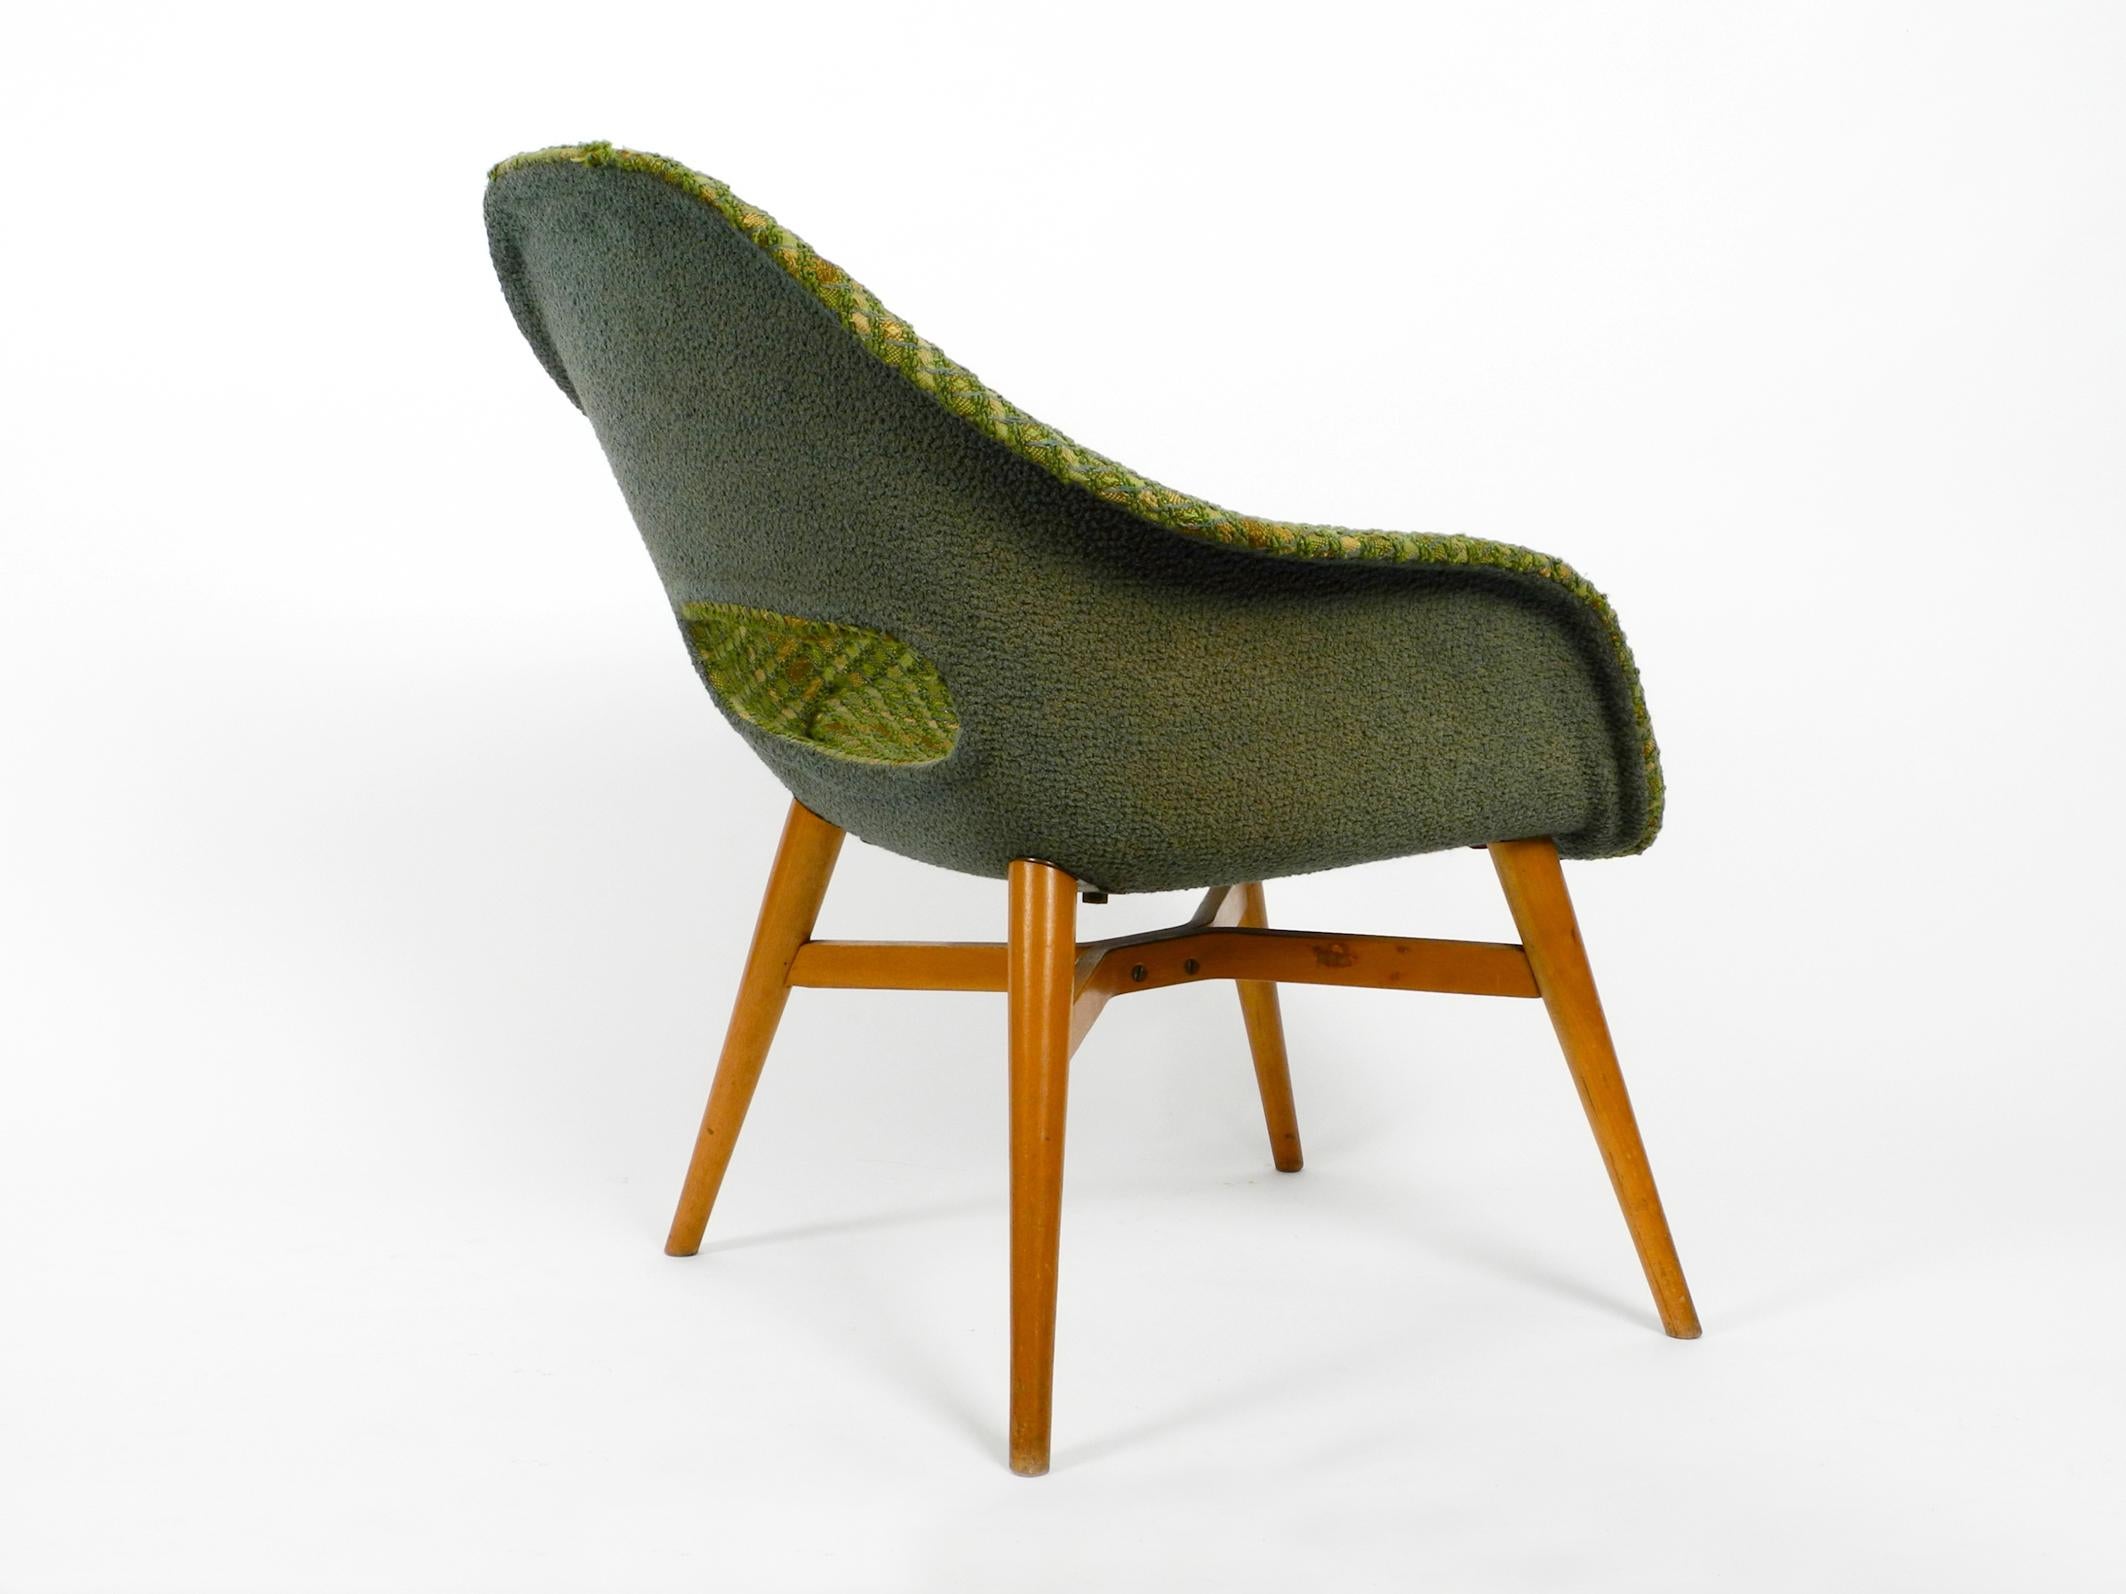 1960s Lounge Chair by Miroslav Navratil with Fiberglass Shell and Original Cover 10